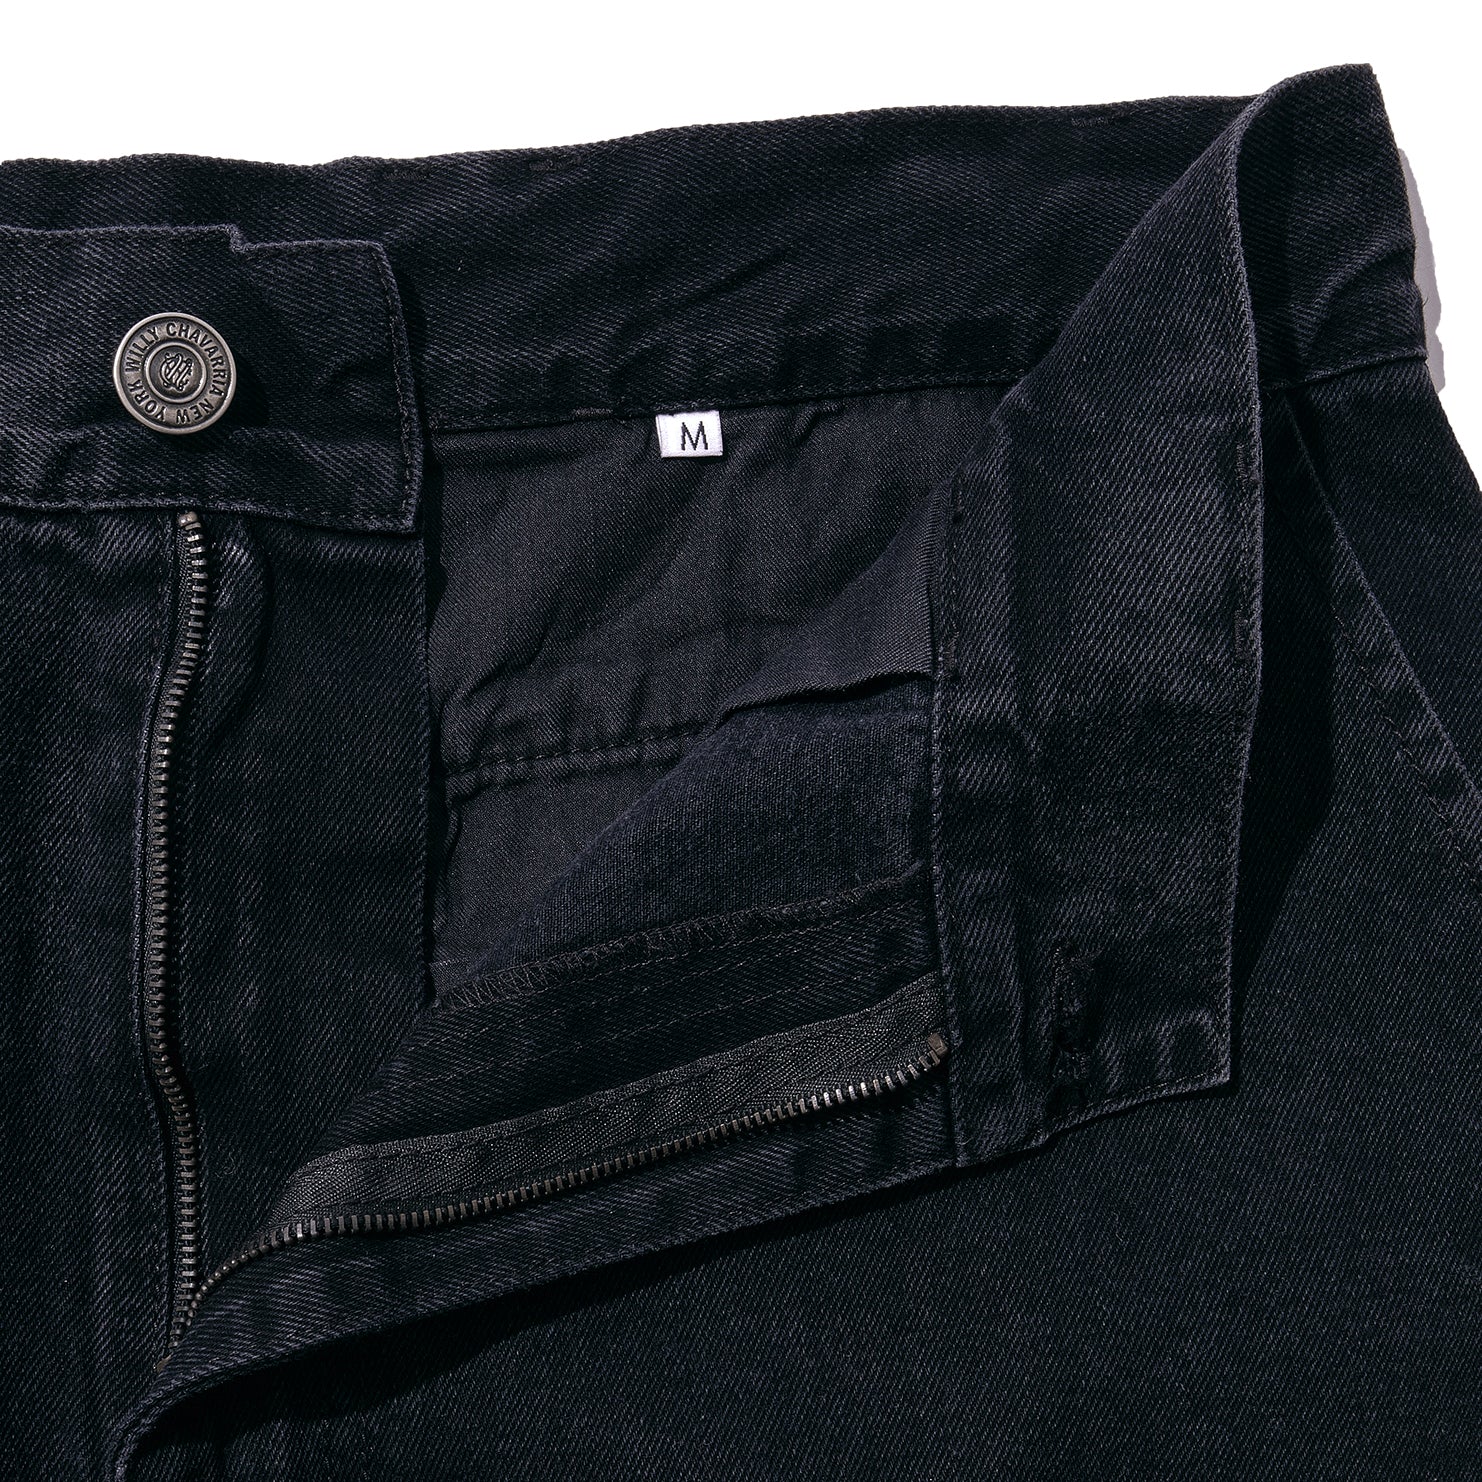 WILLY CHAVARRIA /  WILLY CARGO PANTS WASHED BLACK